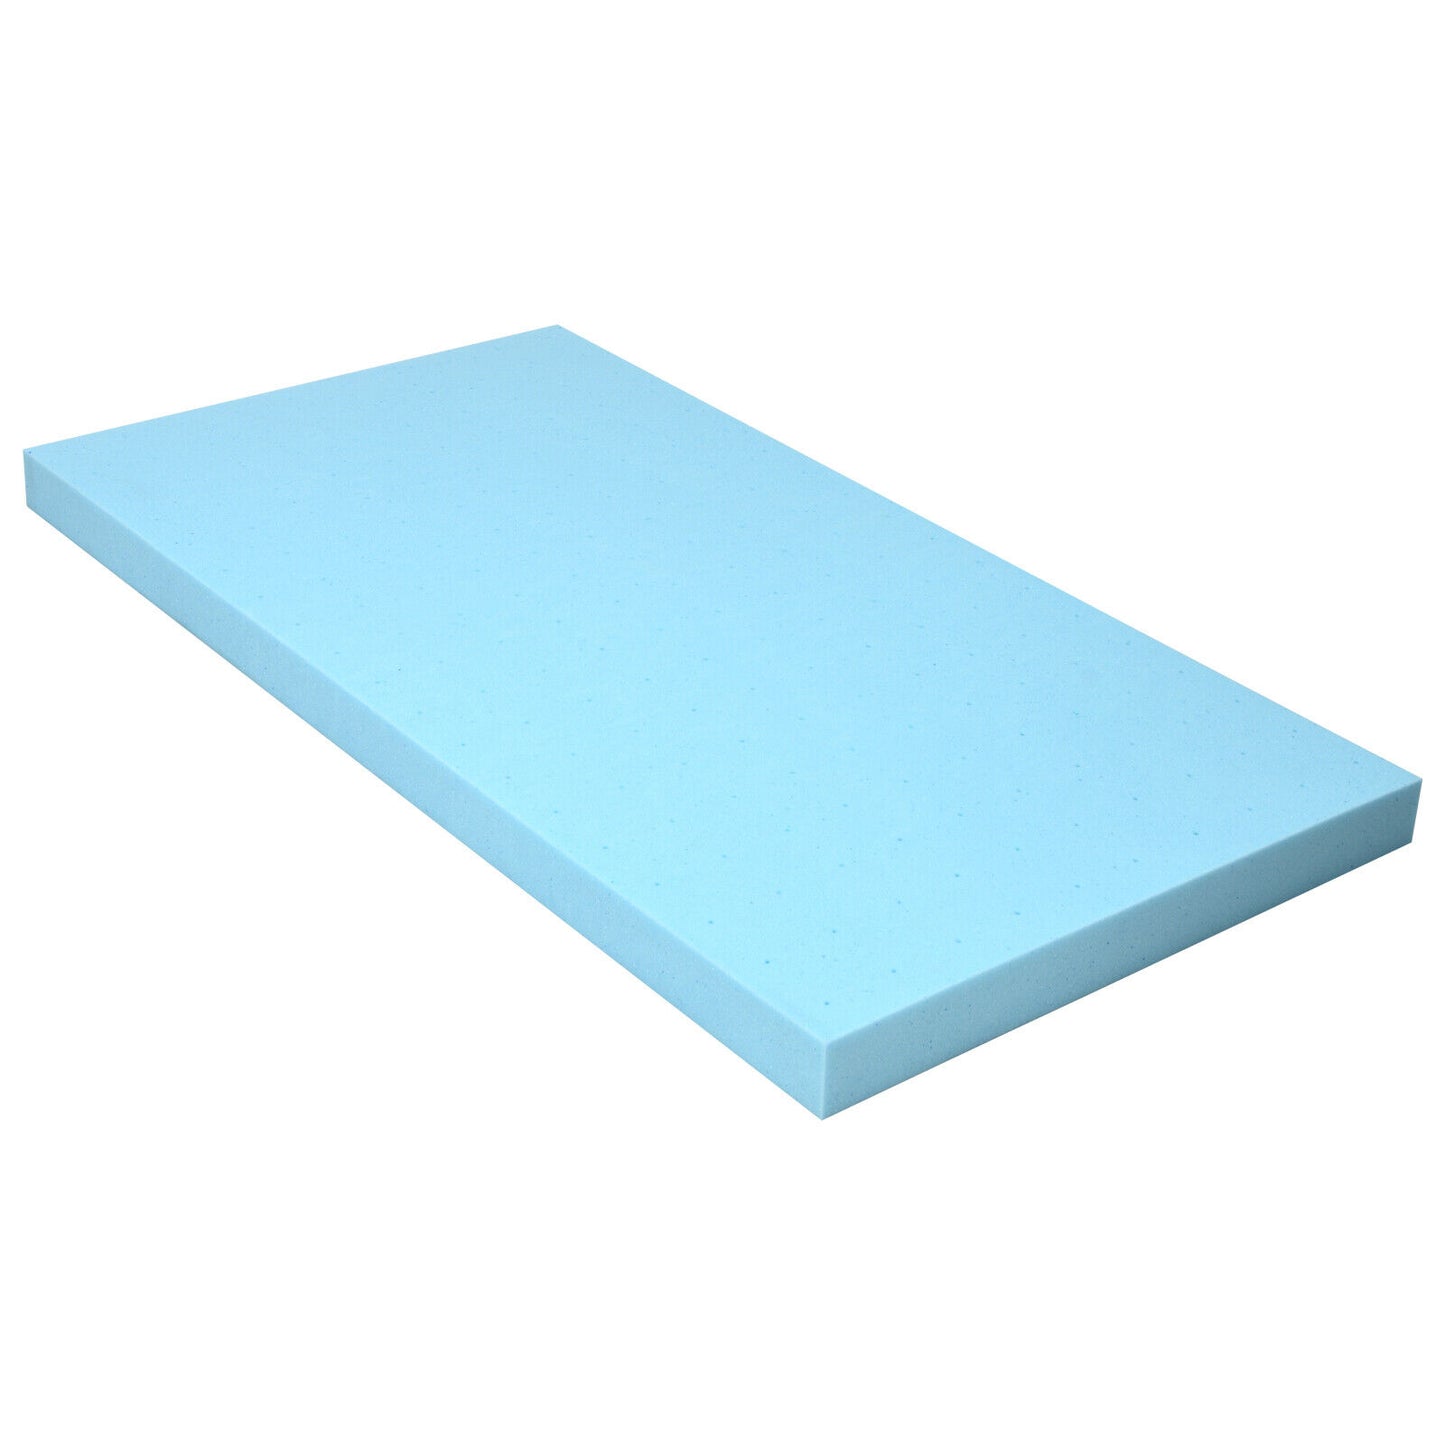 Mattress Topper with Air Ventilation - Gel Infused Mattress Pad